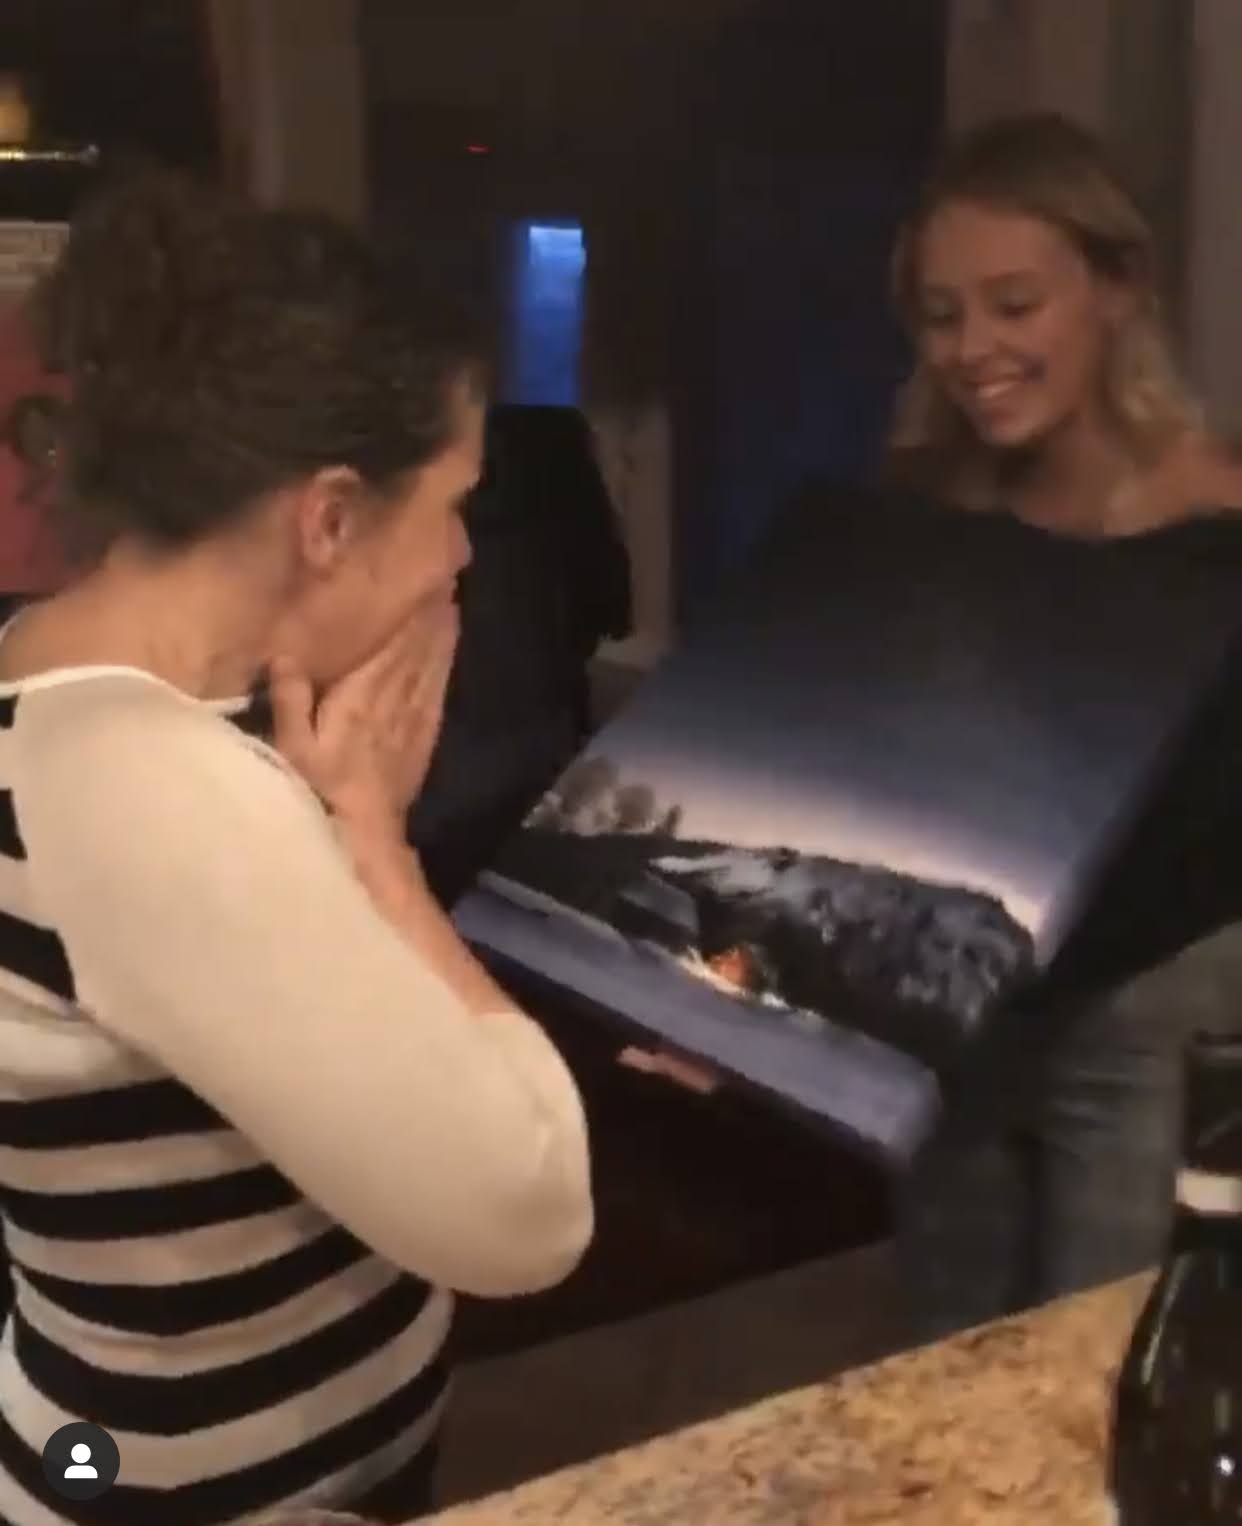 An art collector reacts to seeing a painting her kids commissioned for her of her family's farm in Norway.